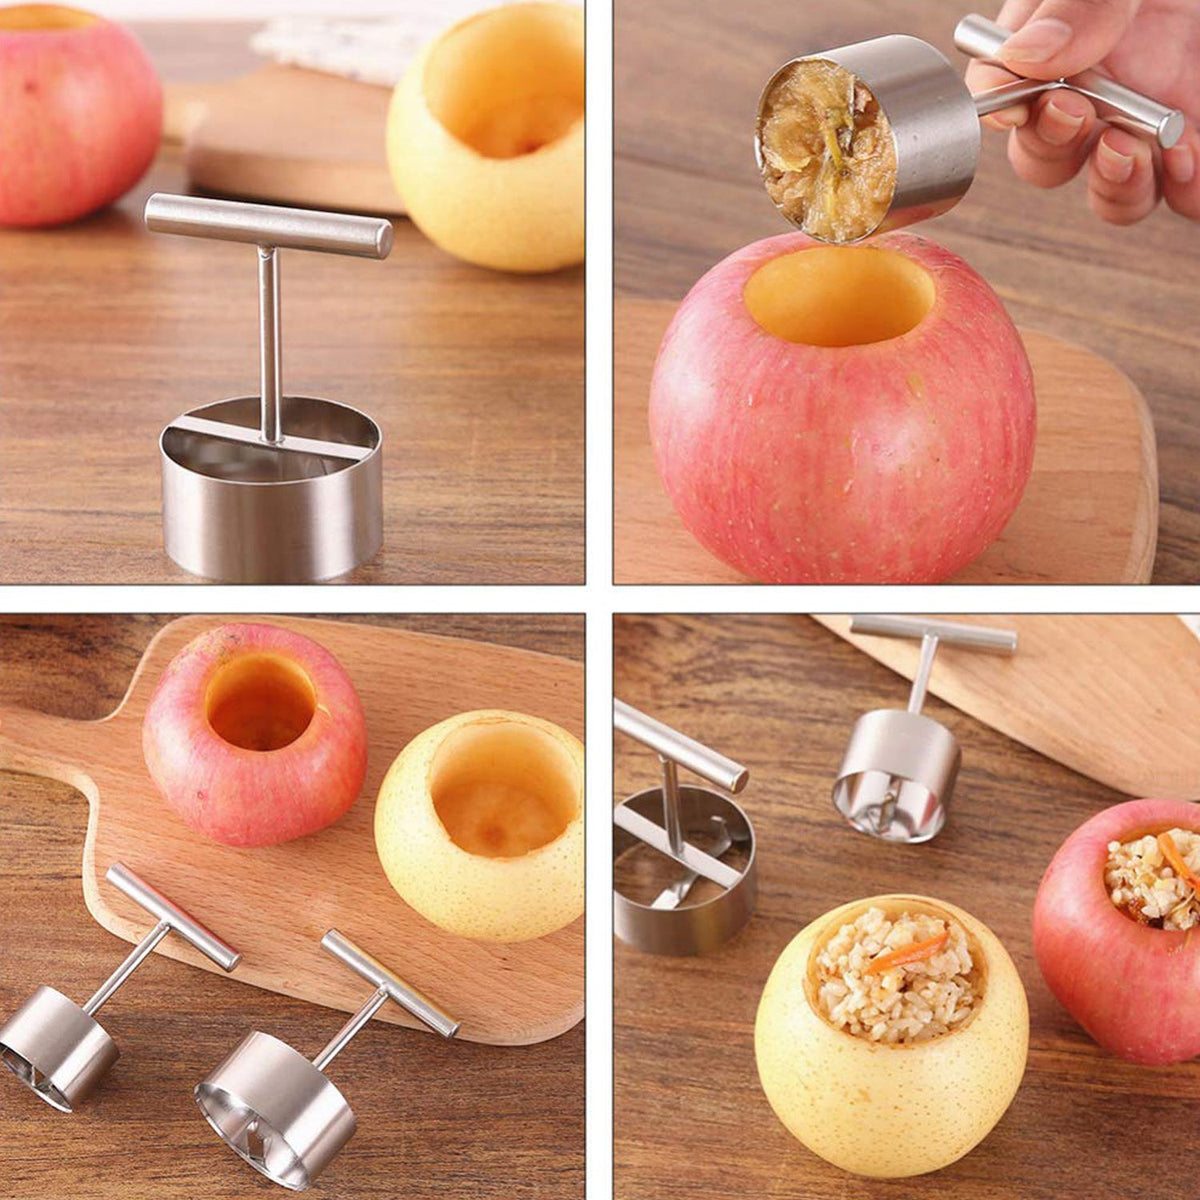 10016 Corer Pear Core Separator Vegetable Core Remover Seeder Cutter Pitter Fruit Hole Remover Coring Tool (1 Pc)